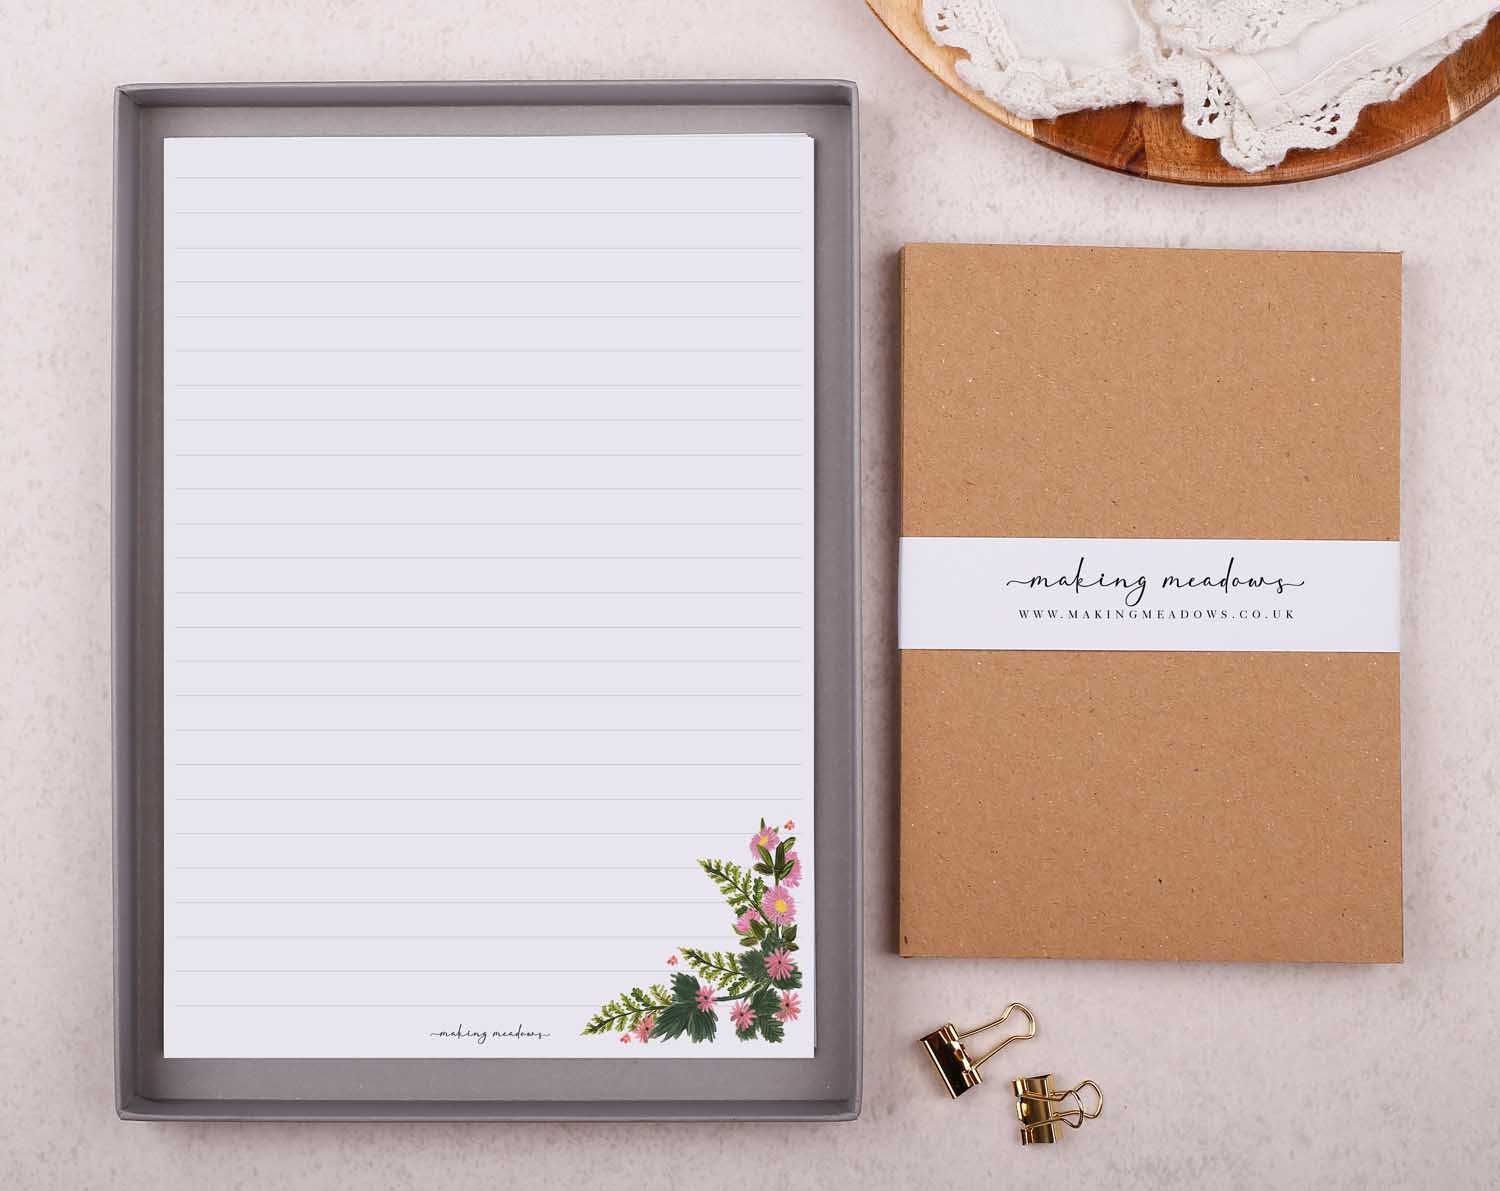 32 sheets of wild flowers design writing paper in a gift box set.